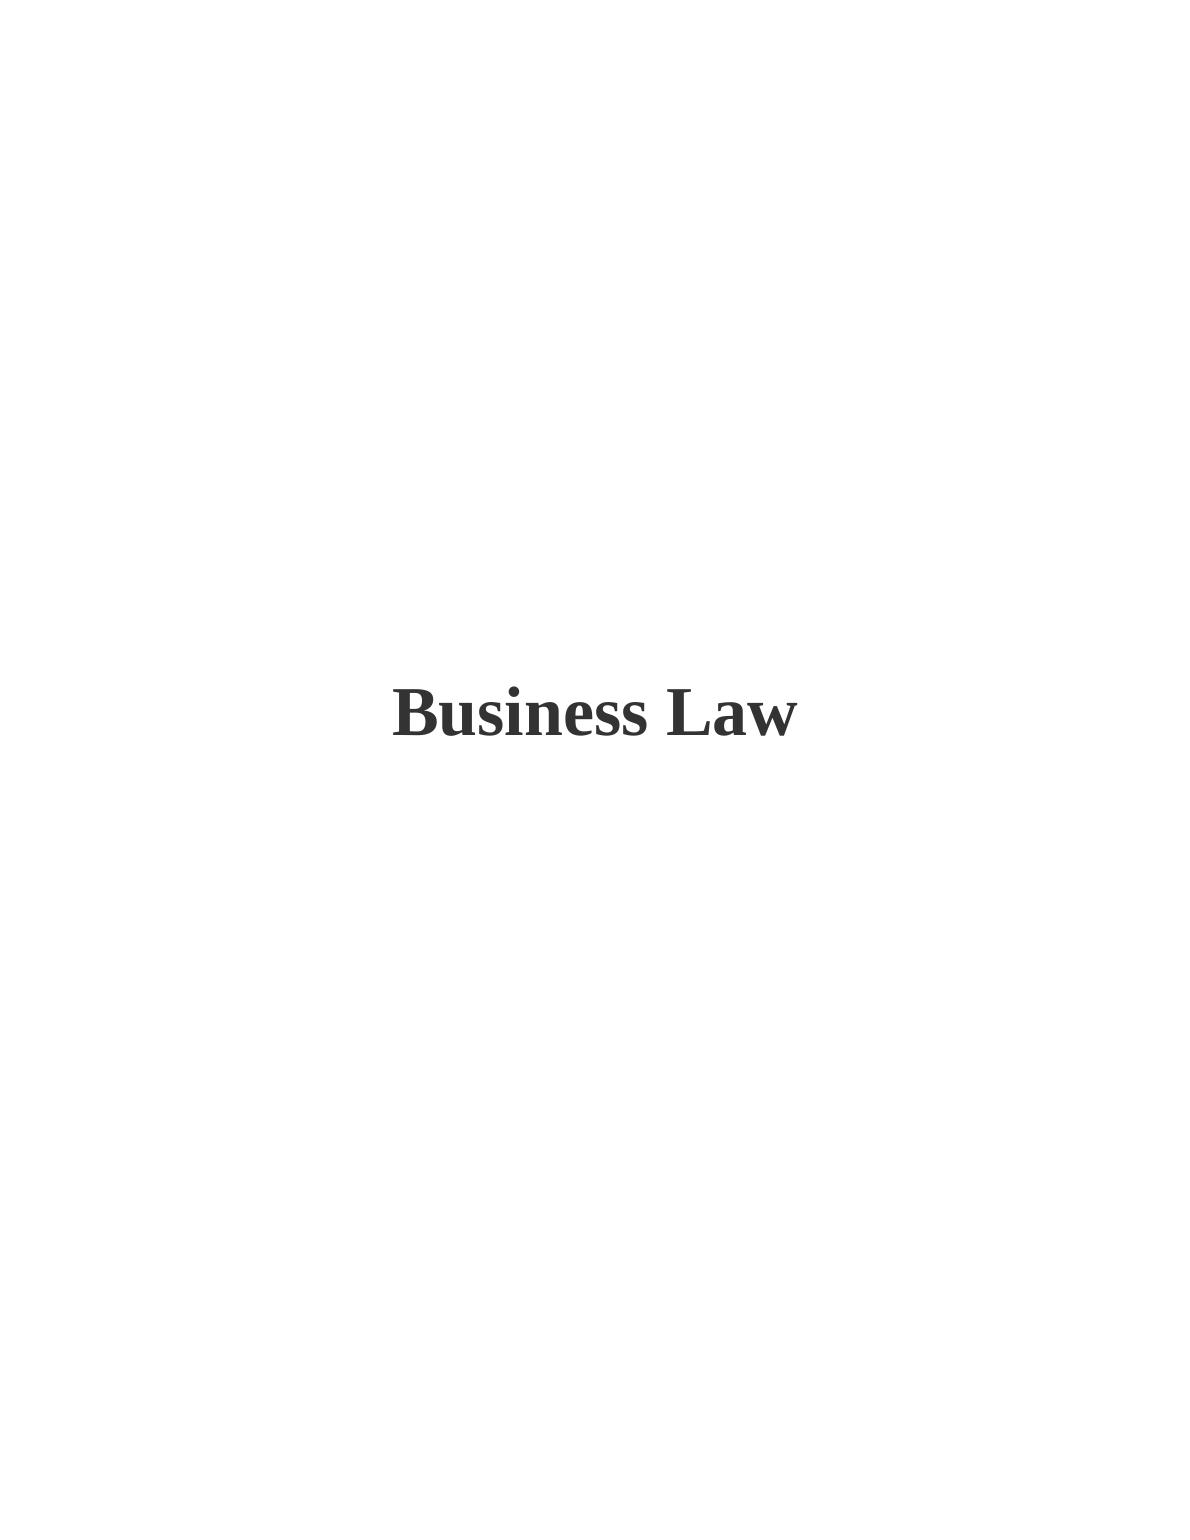 Business Law Assignment - Sale of Goods and Supply of Services_1